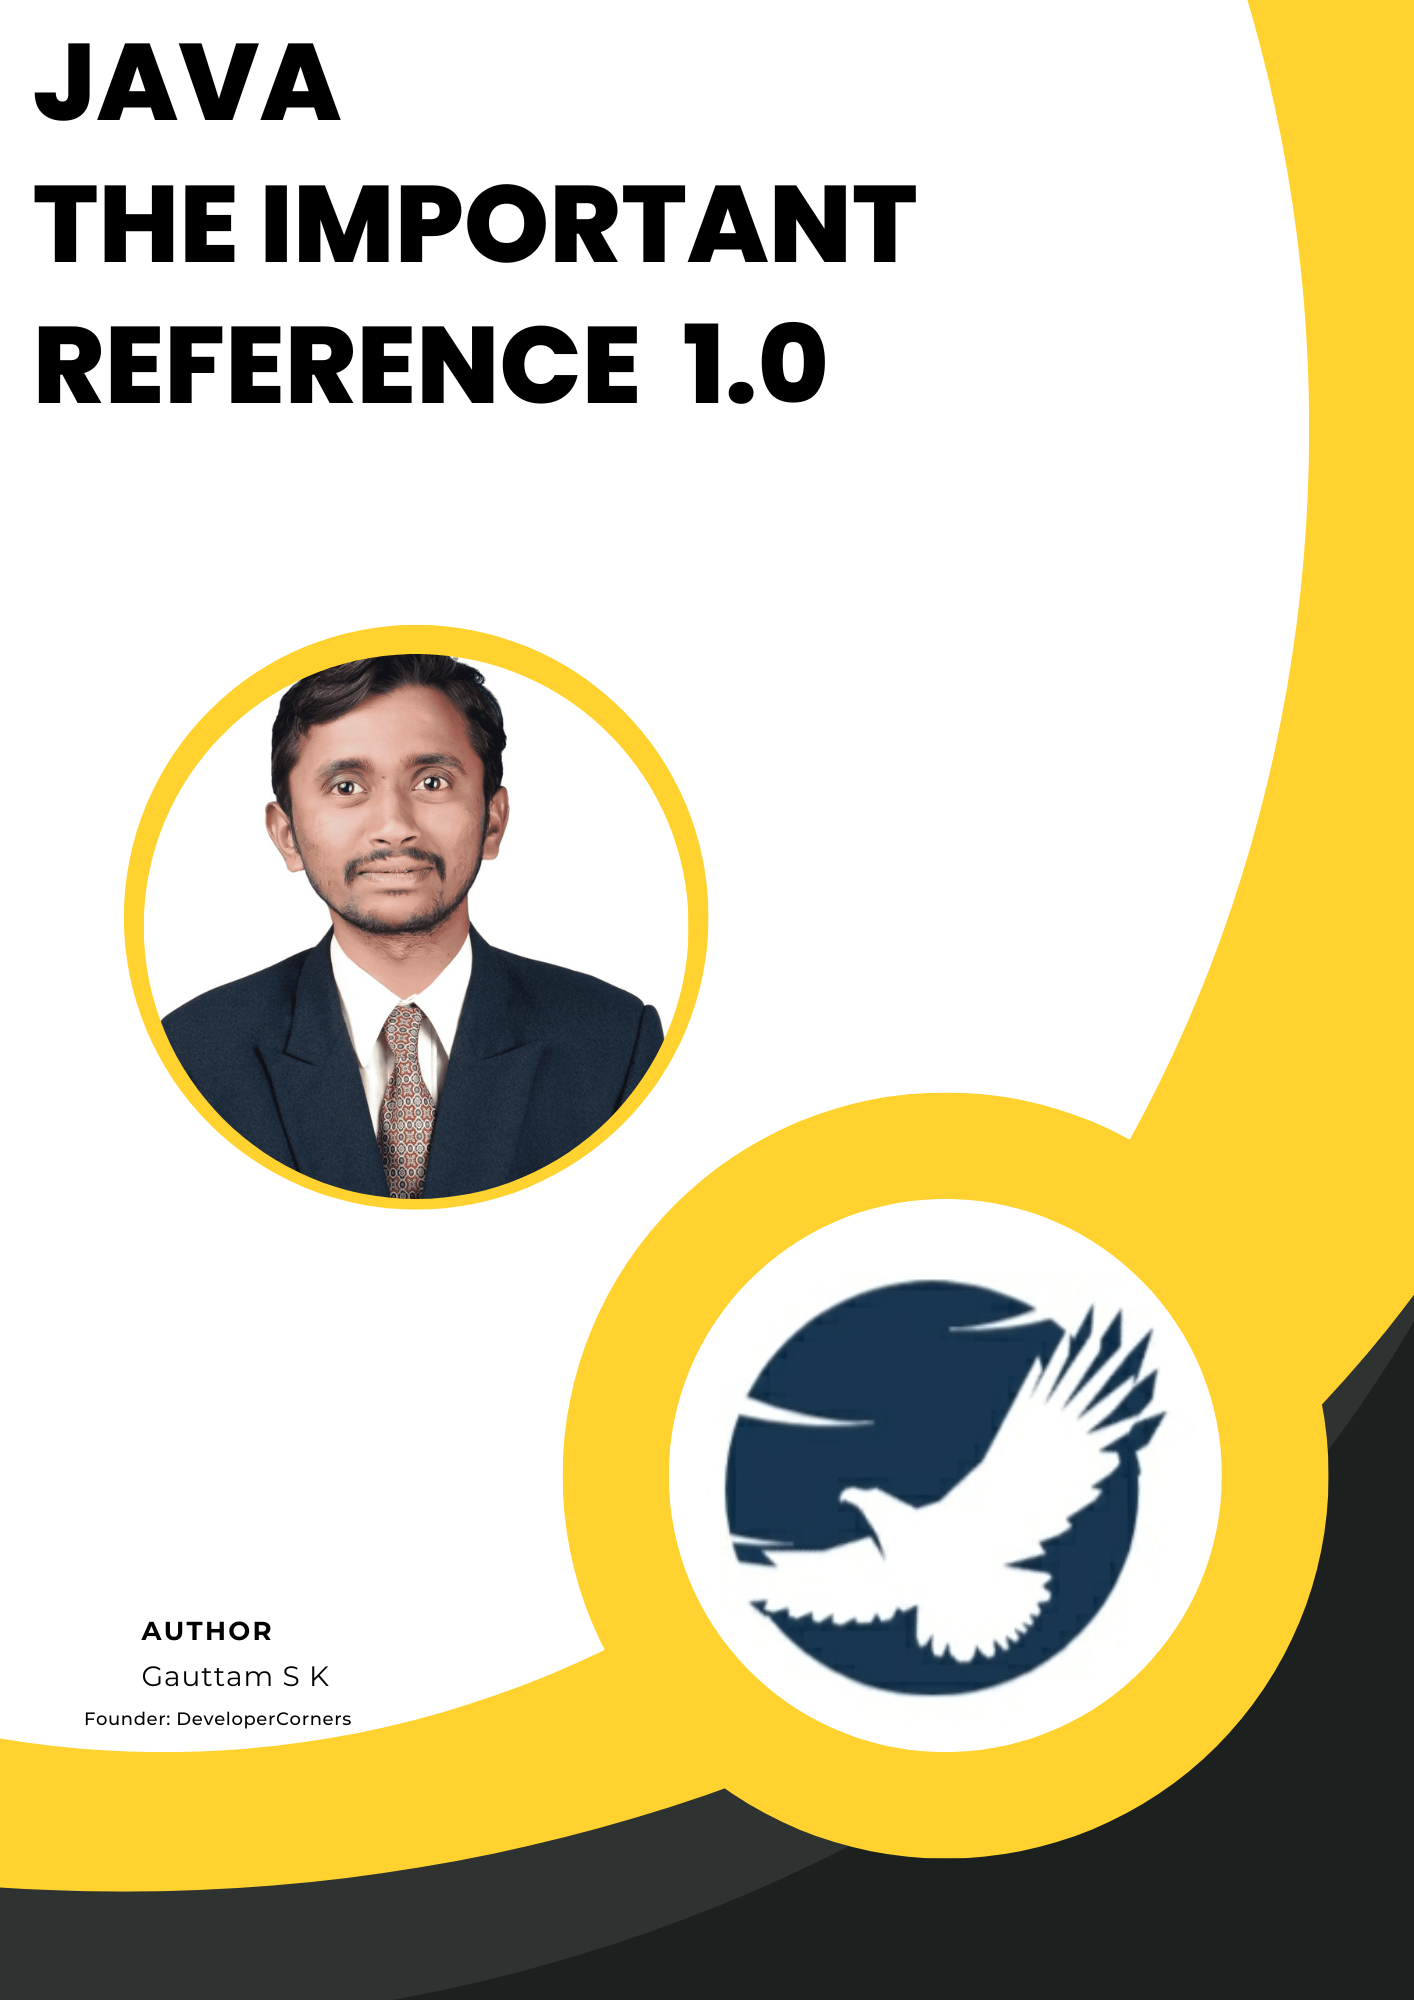 Java The Important Reference 1.0